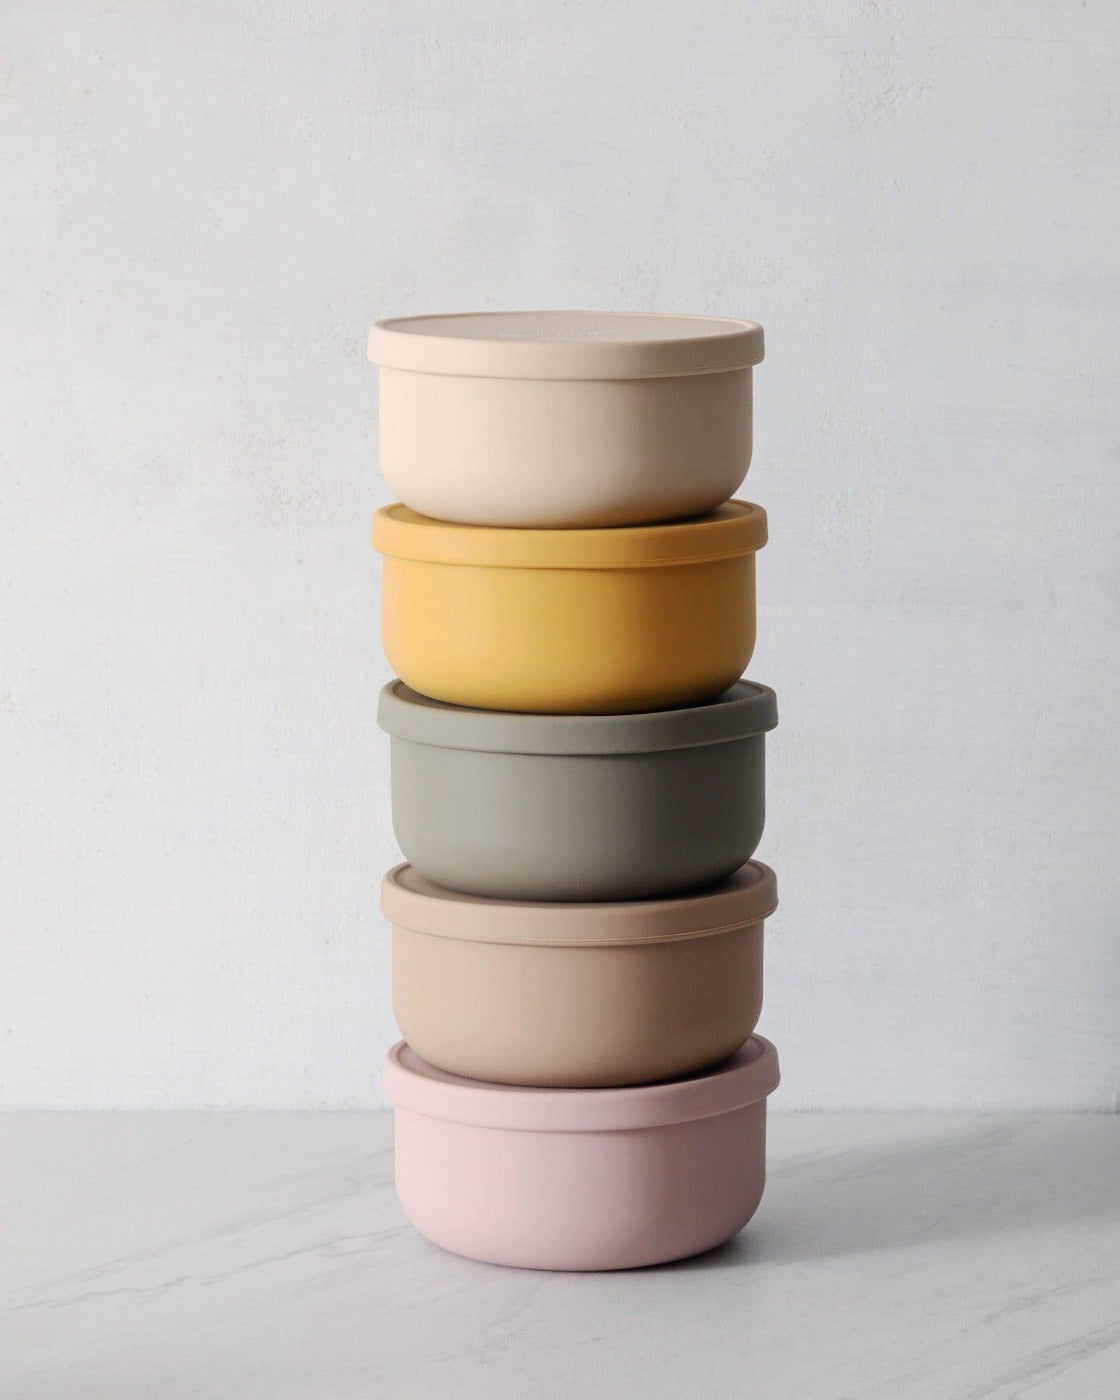 Stack of 5 Stevie Silicone Bowls in Oat, Honey, Olive, Latte & Rose